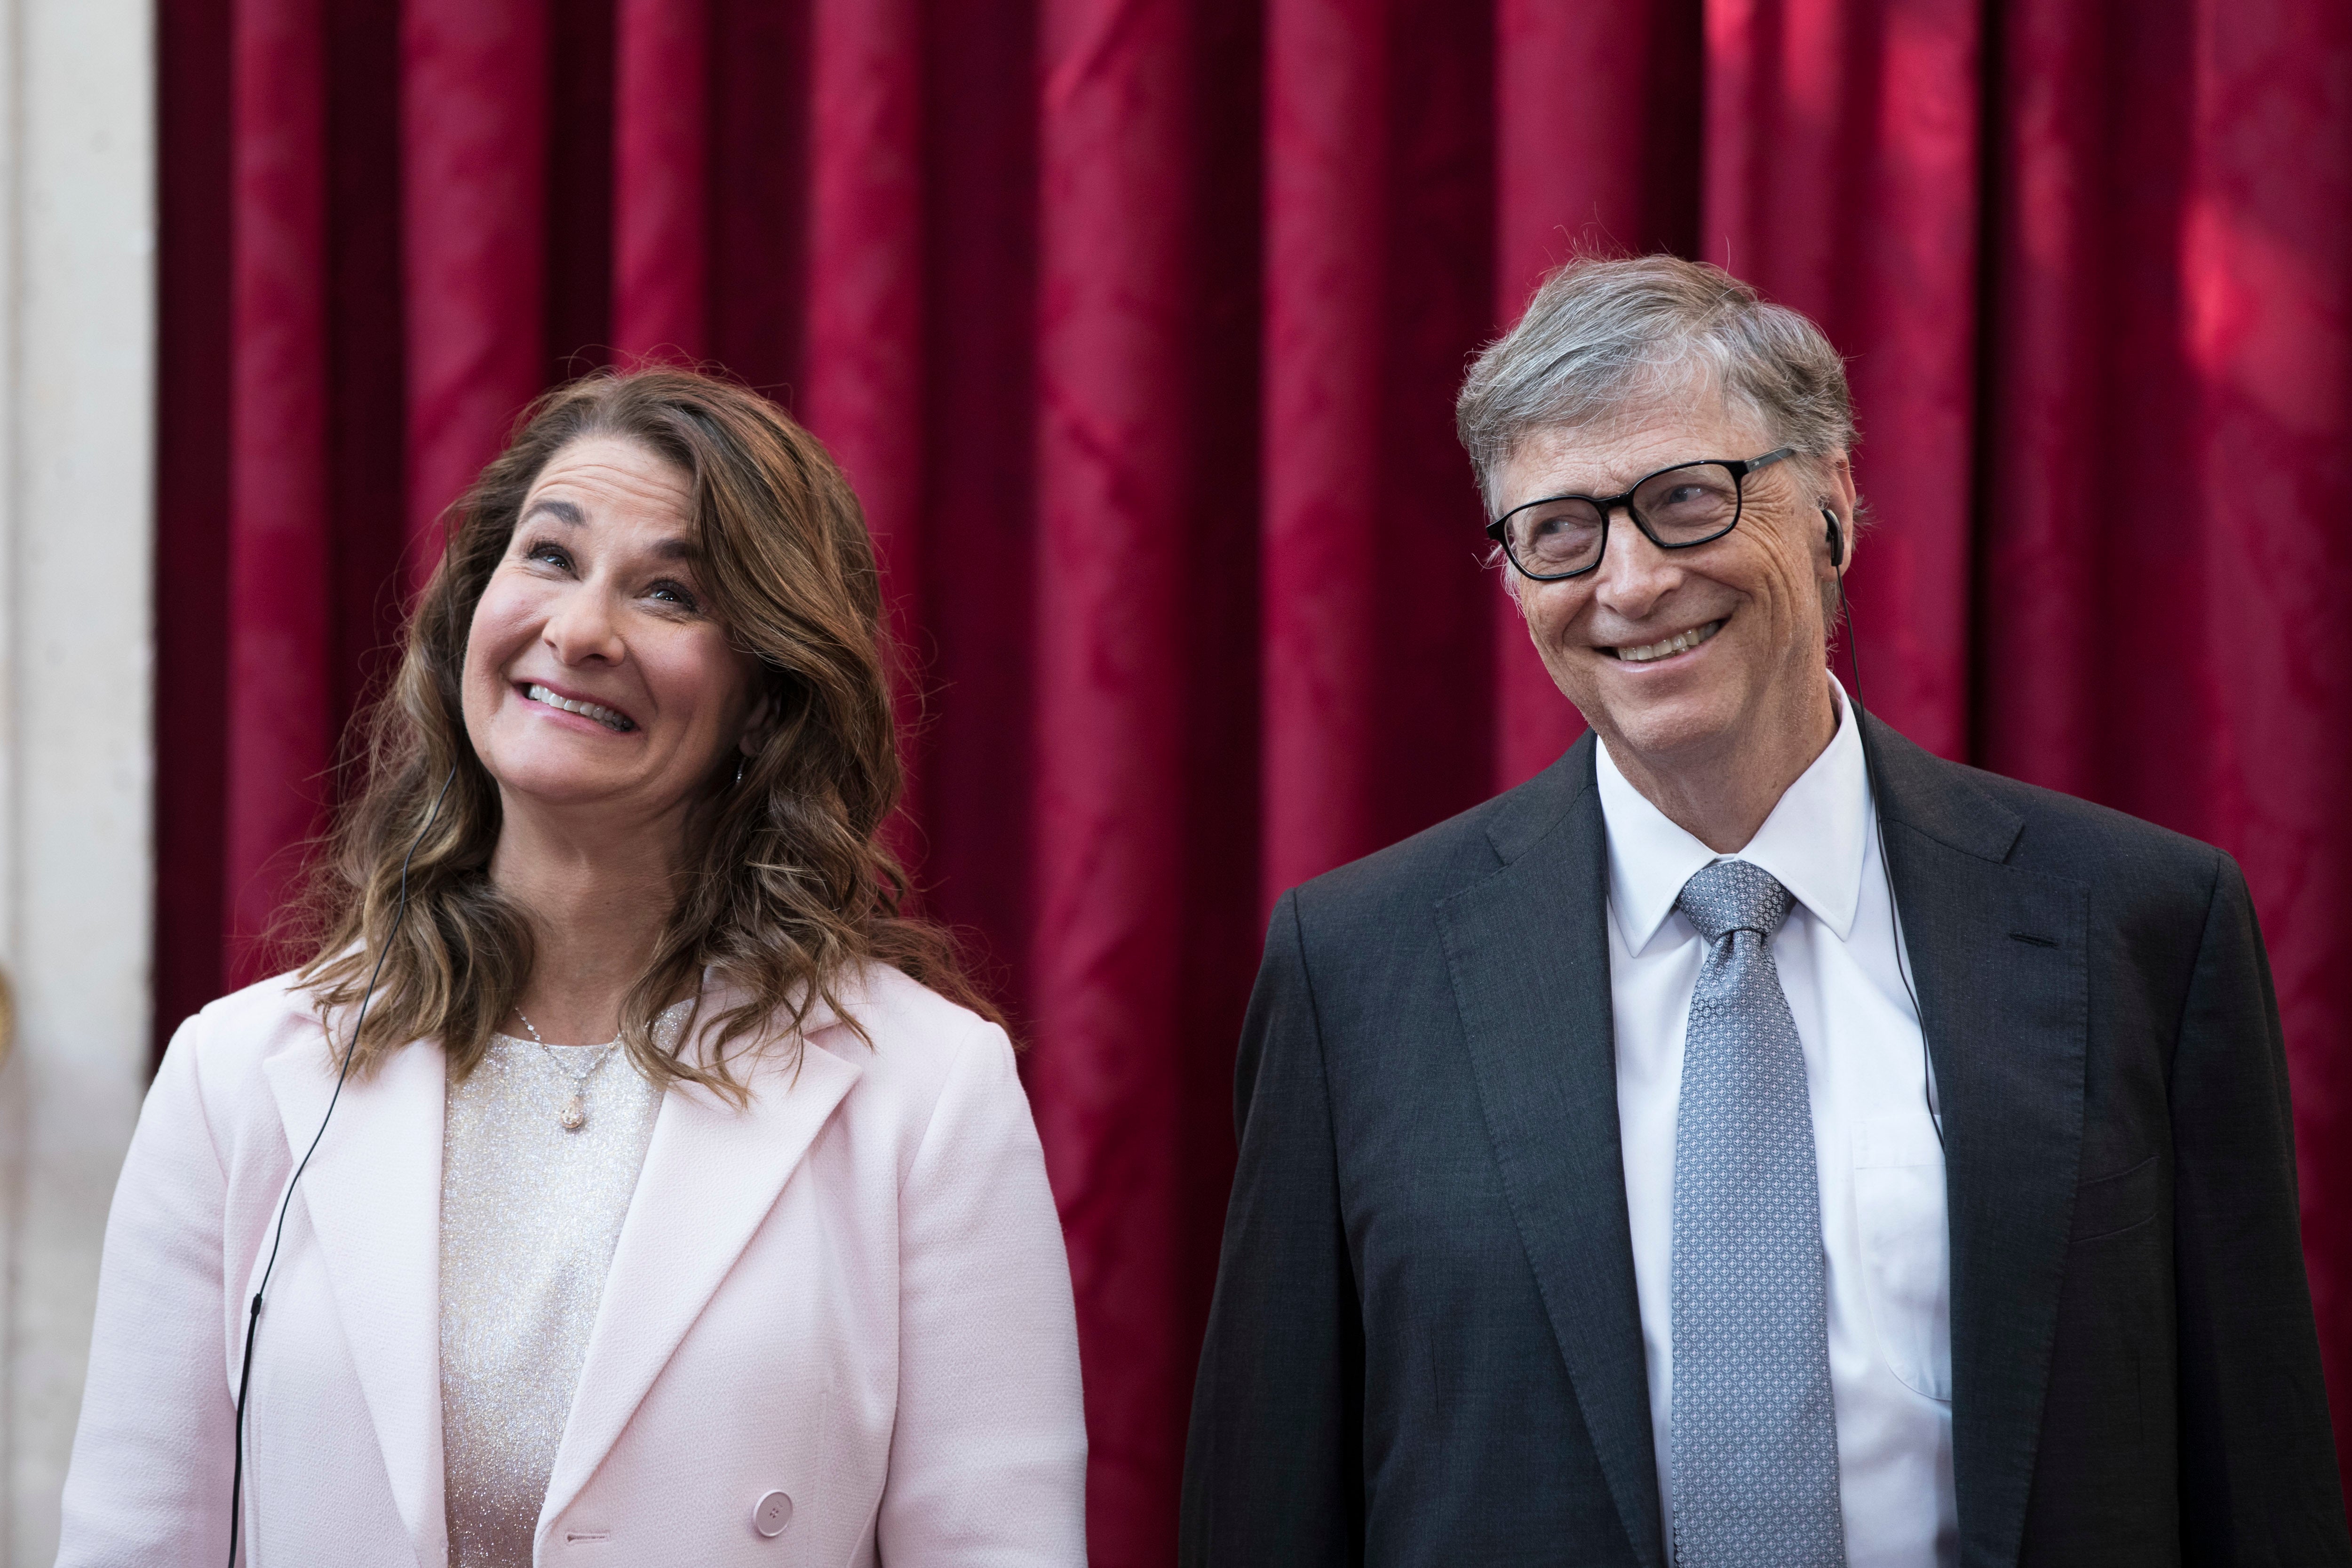 The Bill and Melinda Gates Foundation is reported to be one of the world’s largest charities